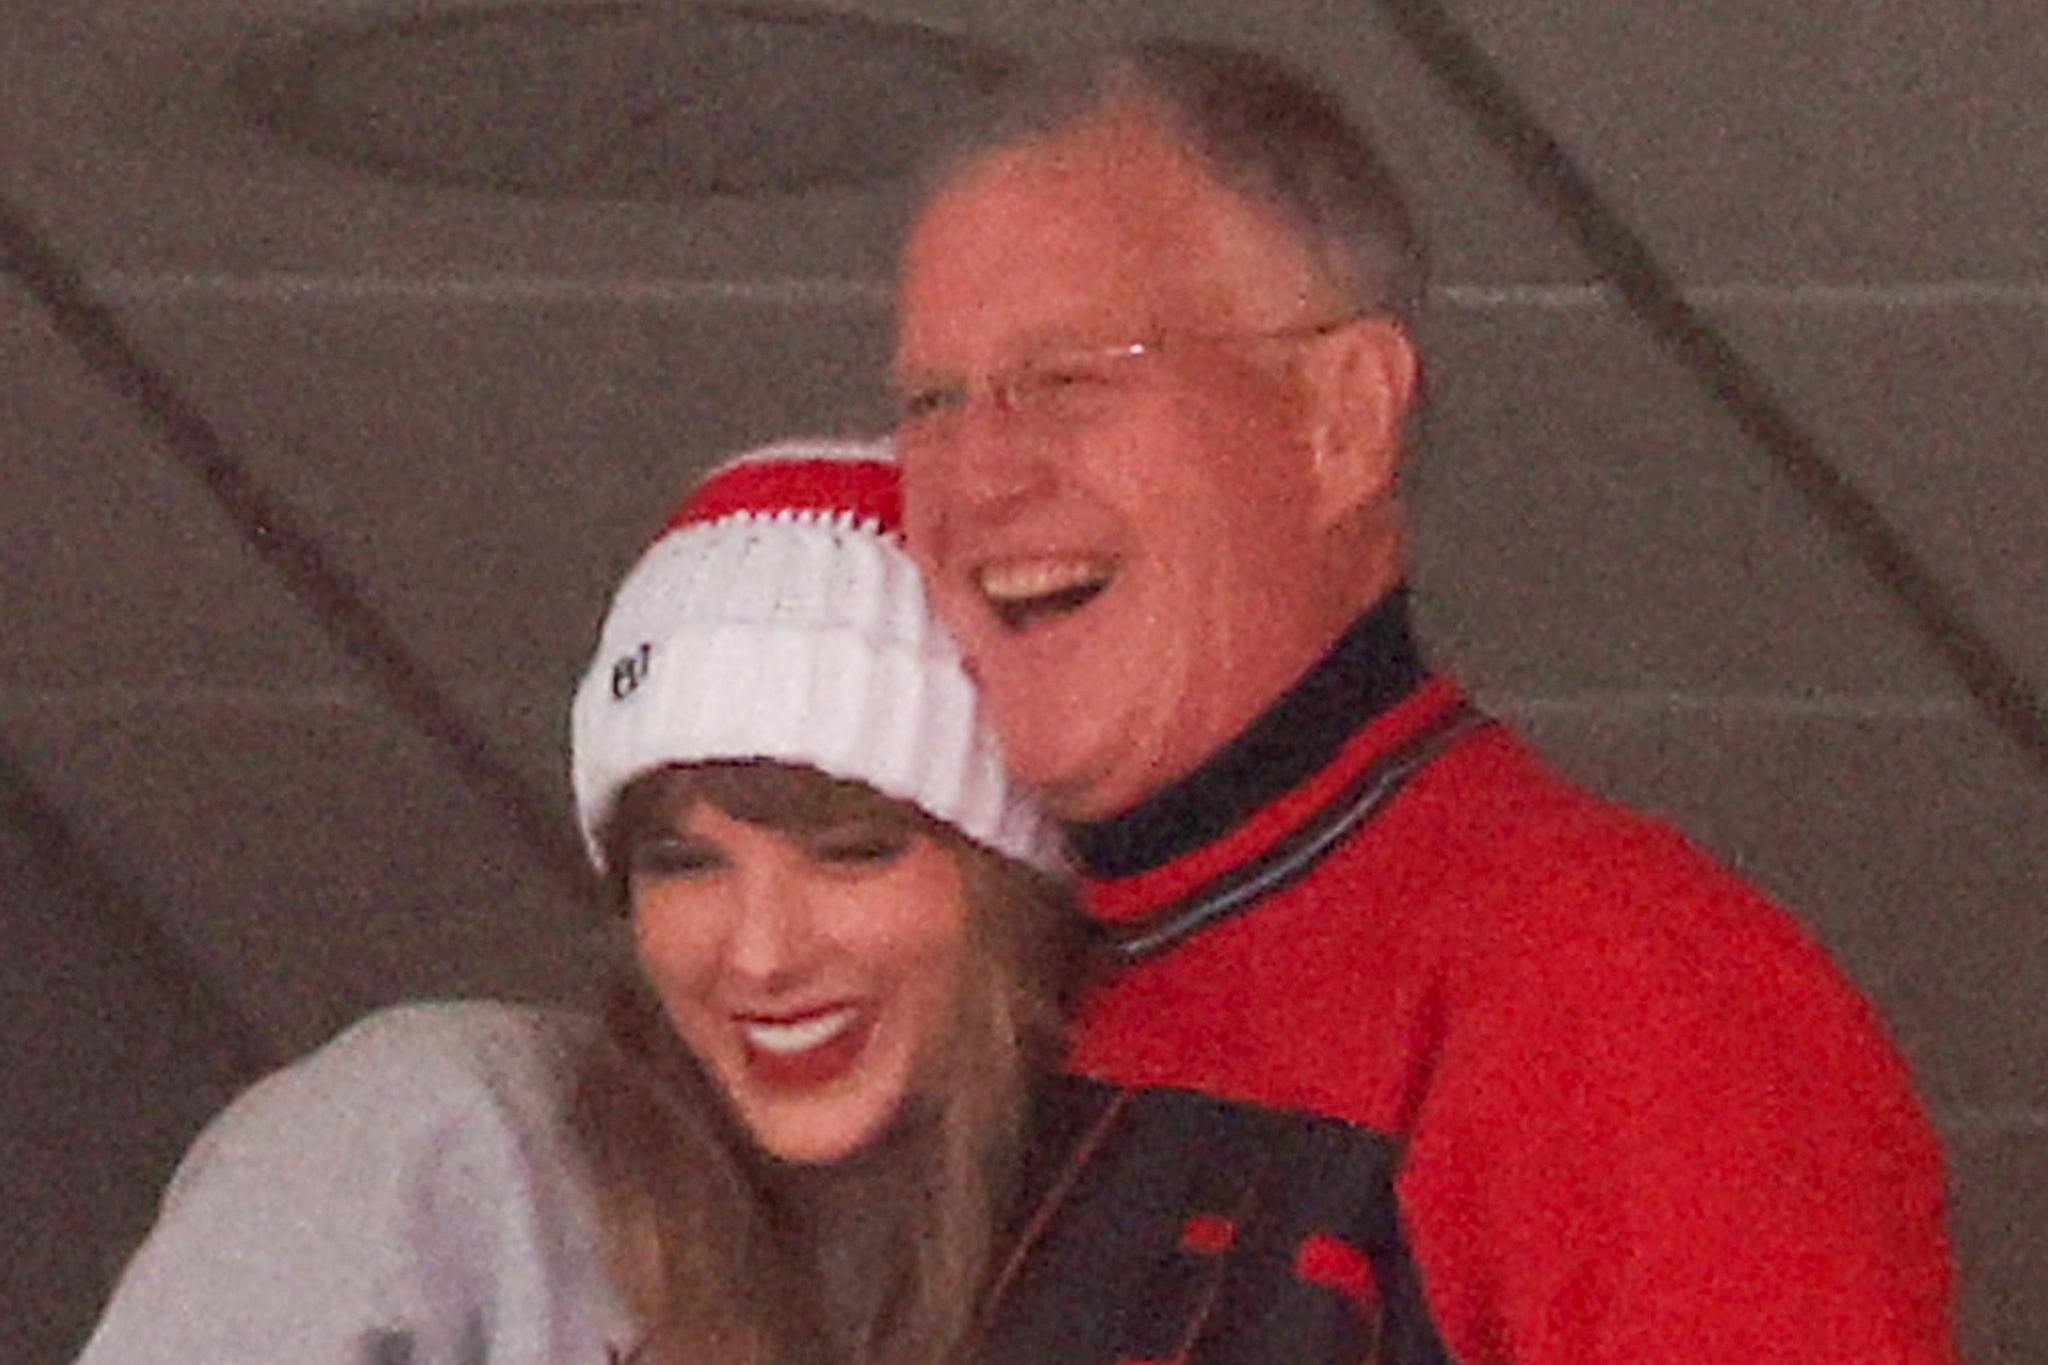 Taylor and her father Scott at a Kansas City Chiefs game in December